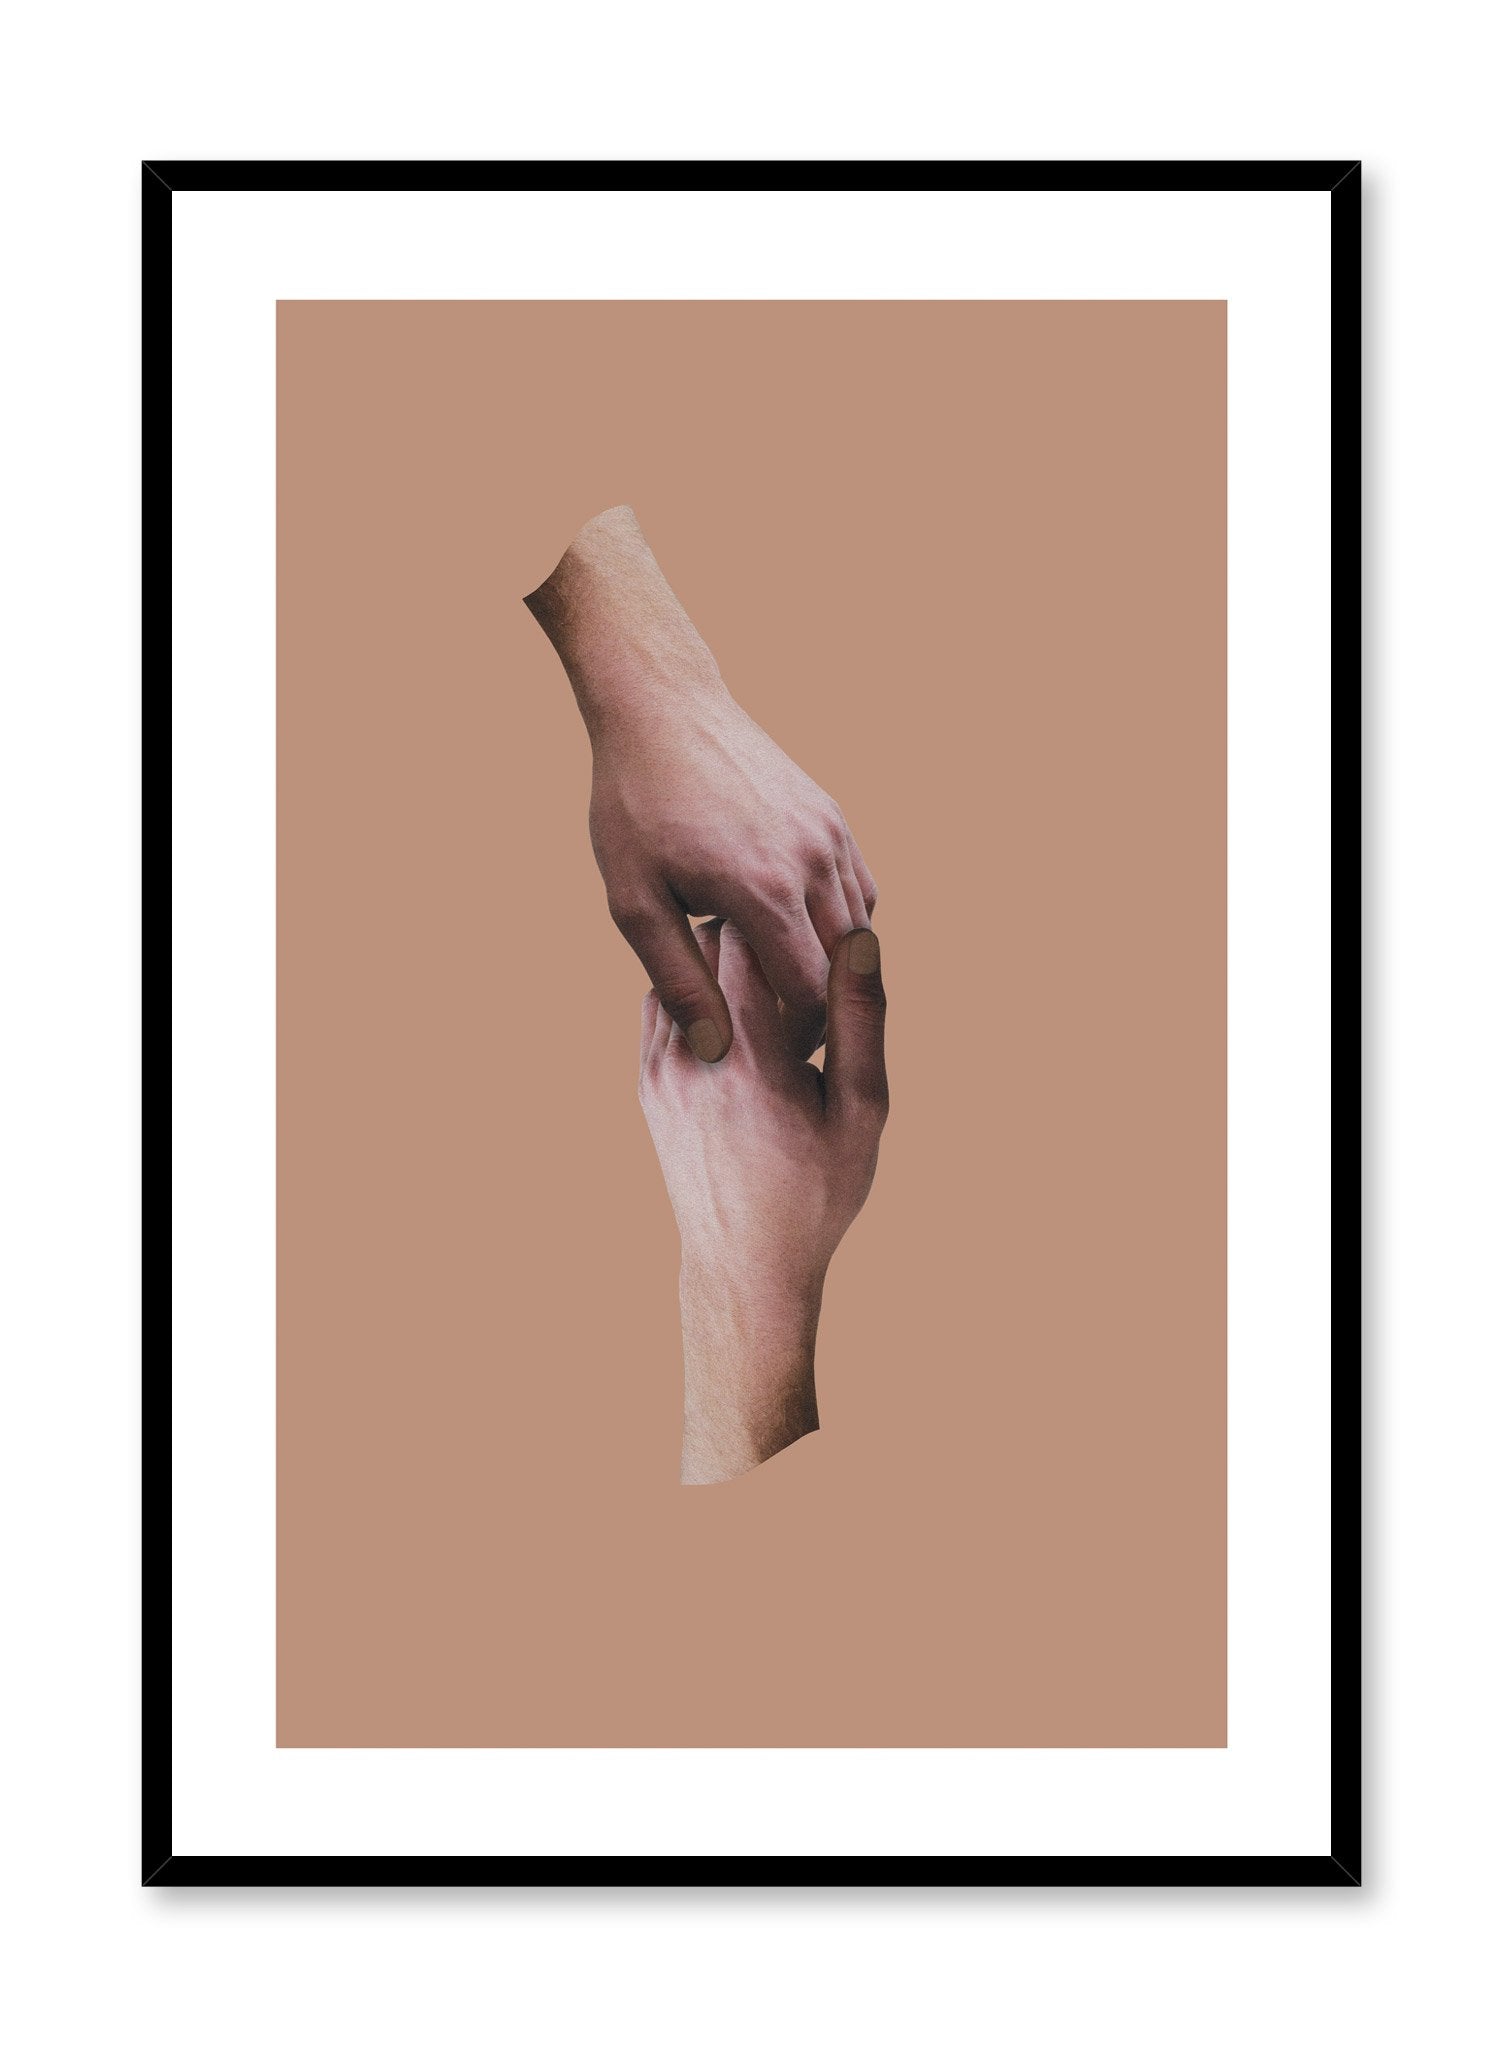 "I've Got You" is a minimalist beige and brown collage poster by Opposite Wall of cutout hands holding over a light brown background. 